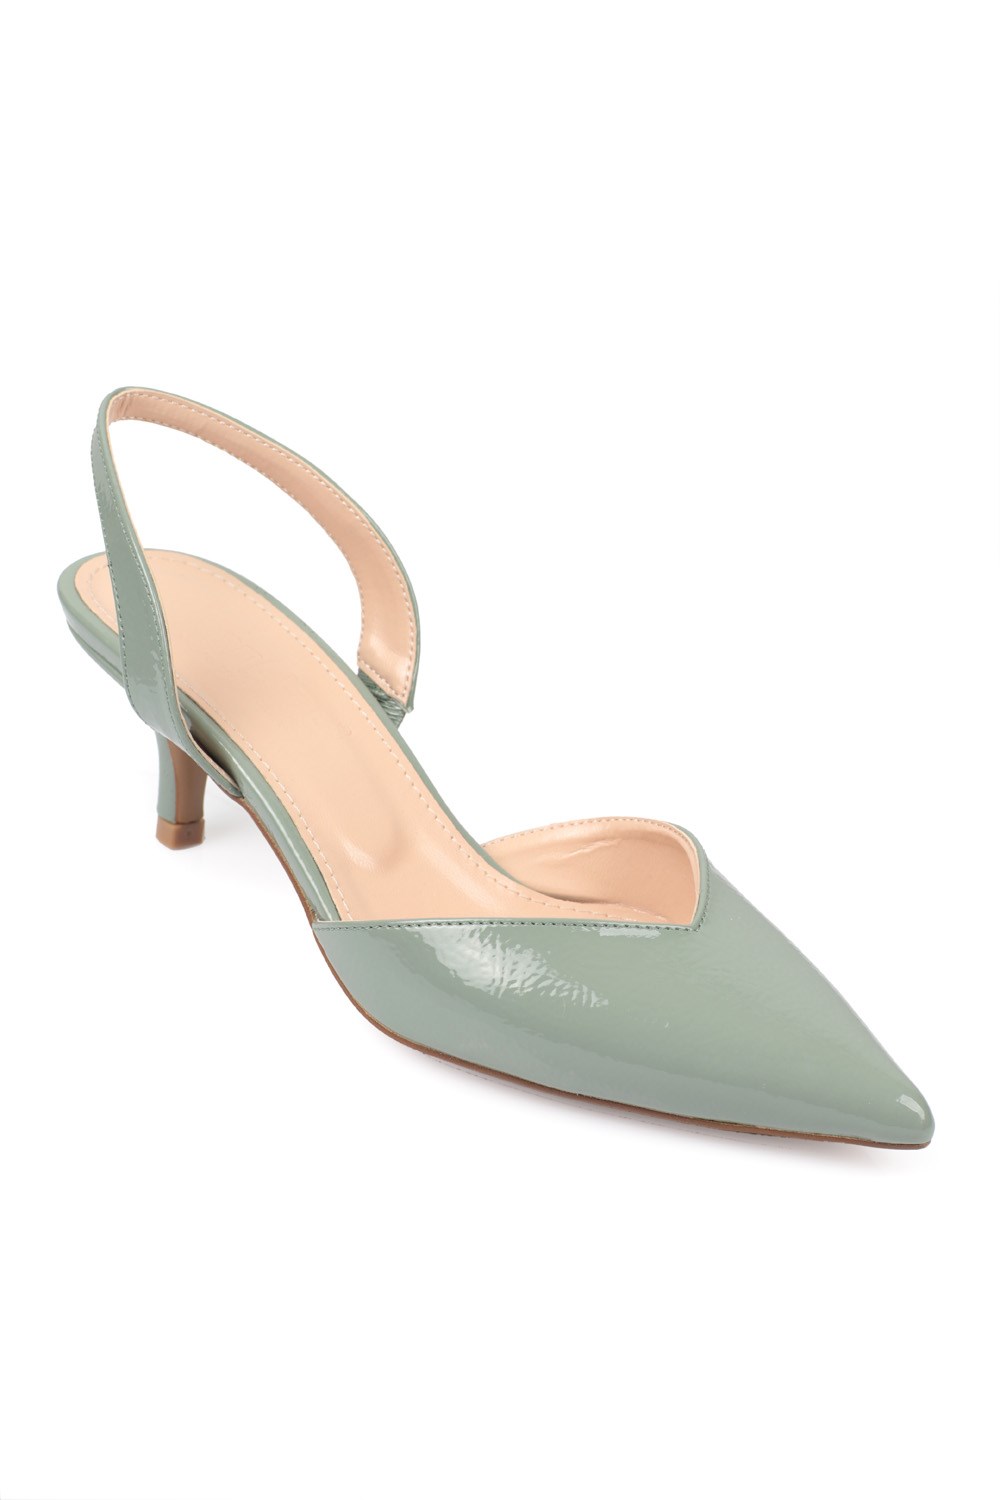 Afleiden Norm Rusland Capone Pointed Toe Slingback Mid Kitten Heel Crinkly Patent Leather Women Mint  Green Shoes | caponeoutfitters.com